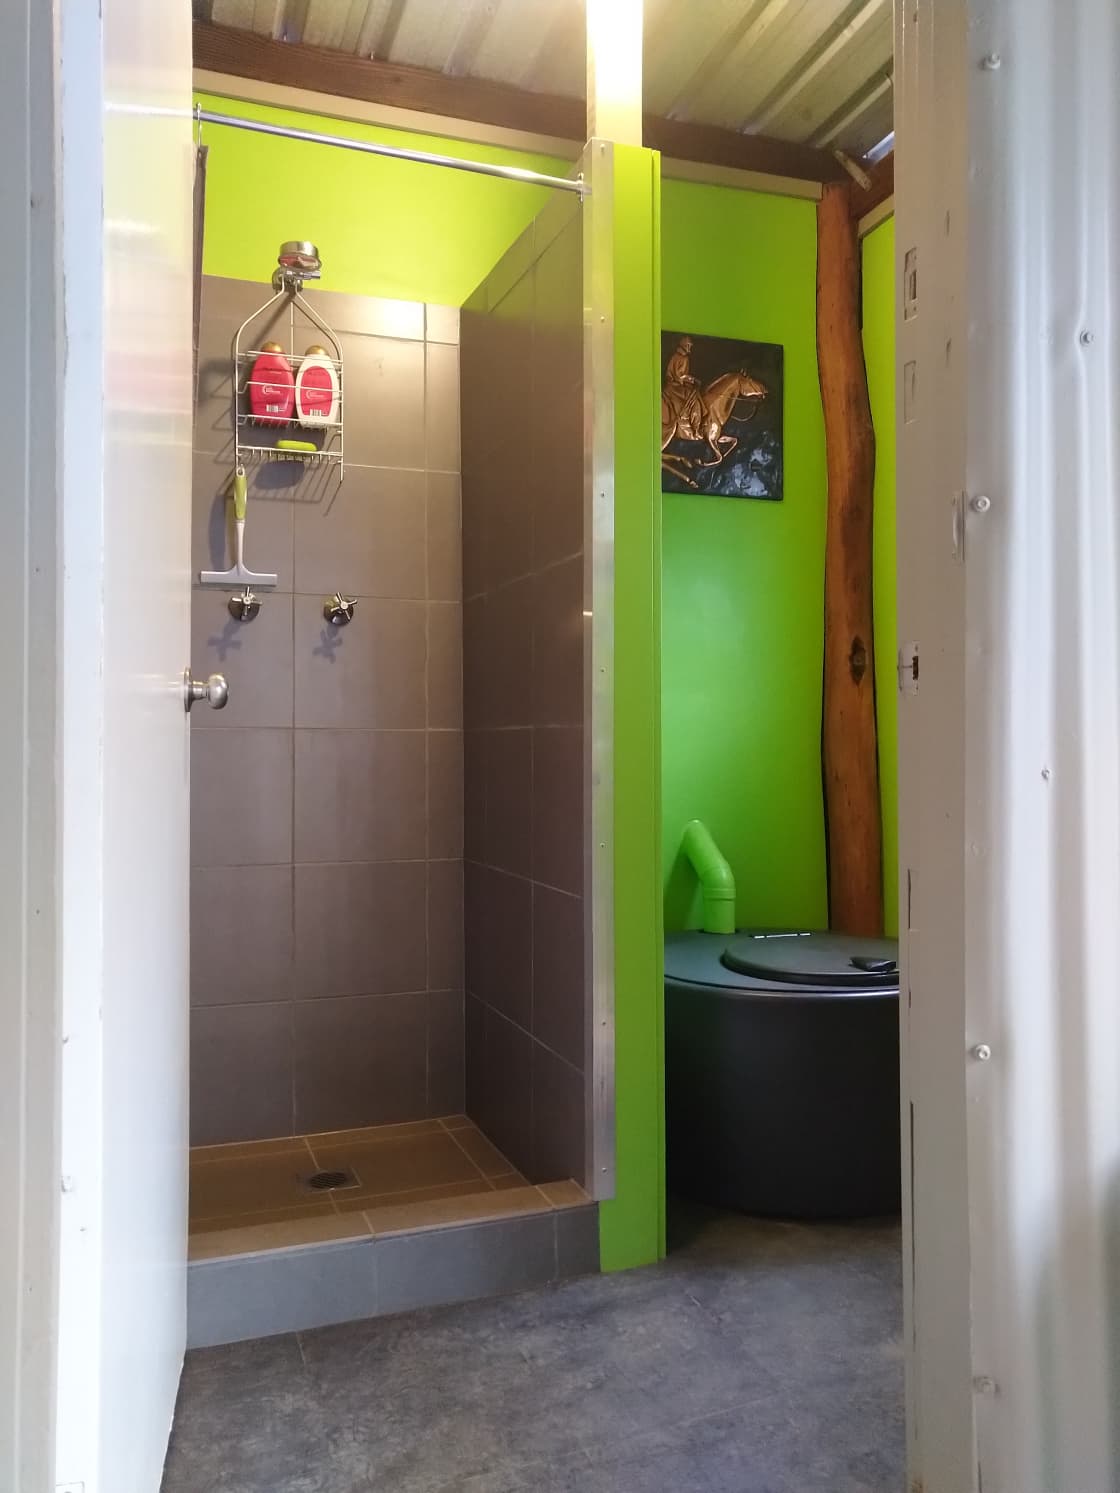 The shower and toilet room.